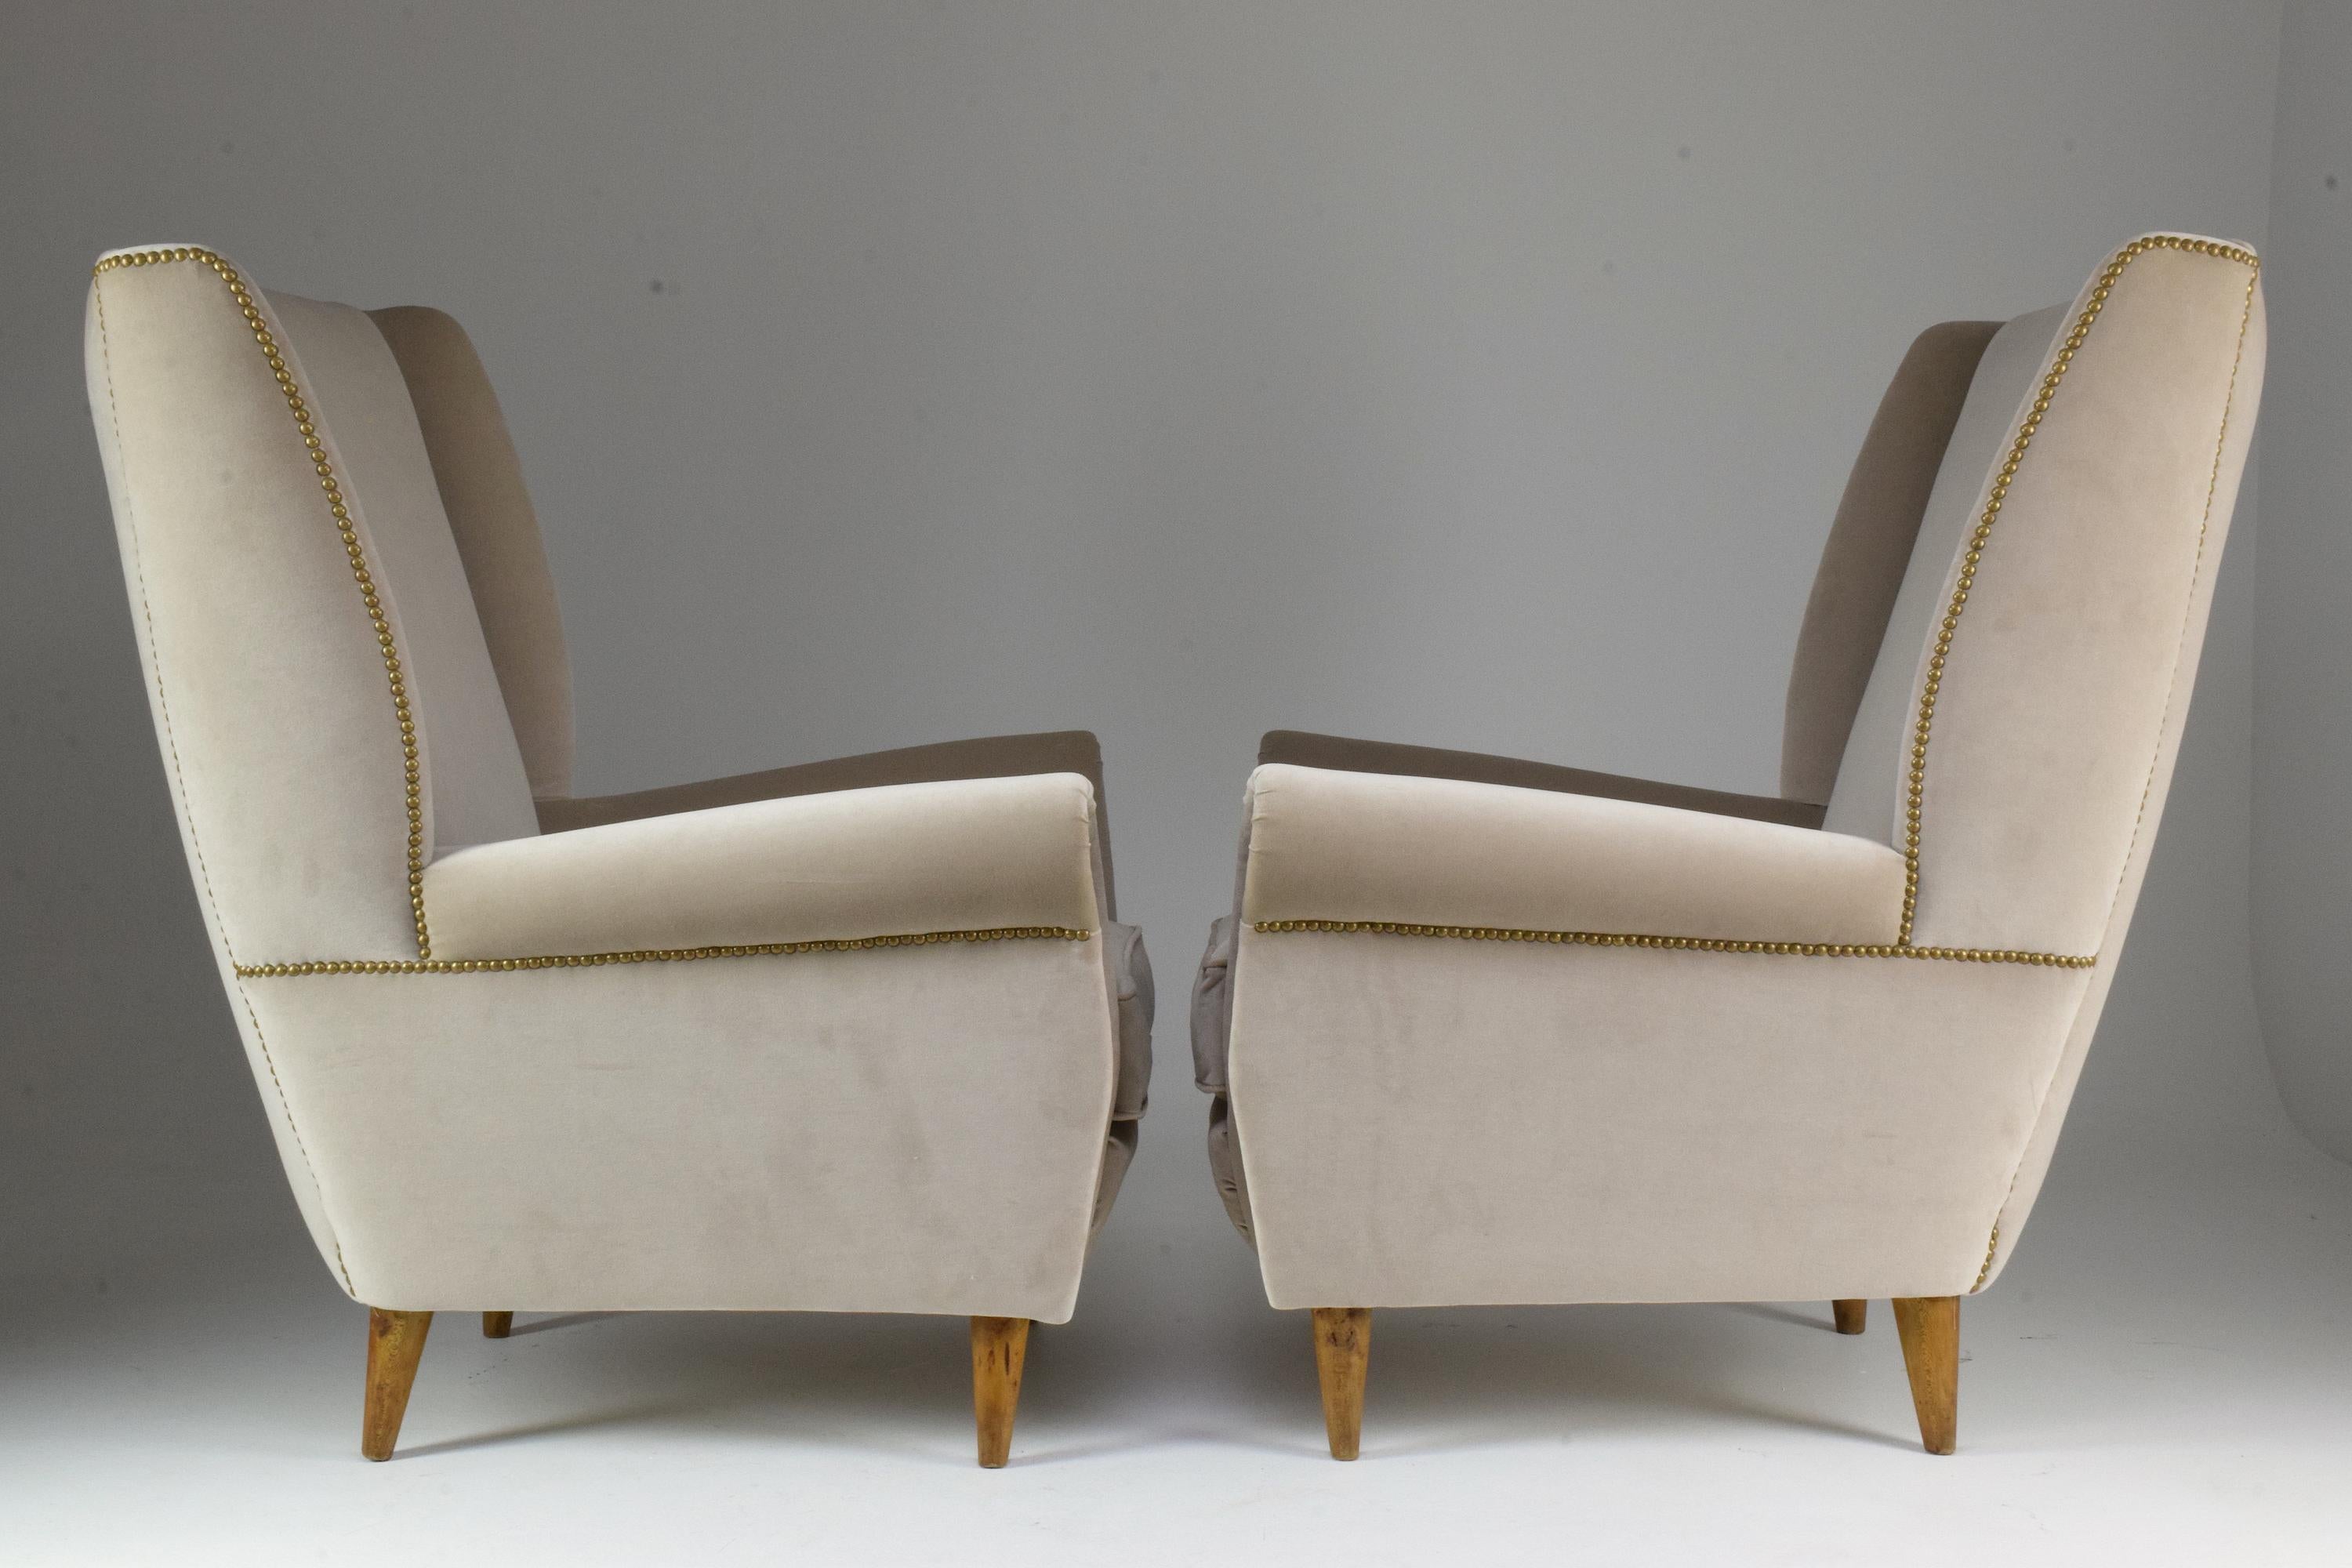 Pair of 20th Century Armchairs In the Style of Gio Ponti, 1940s For Sale 4